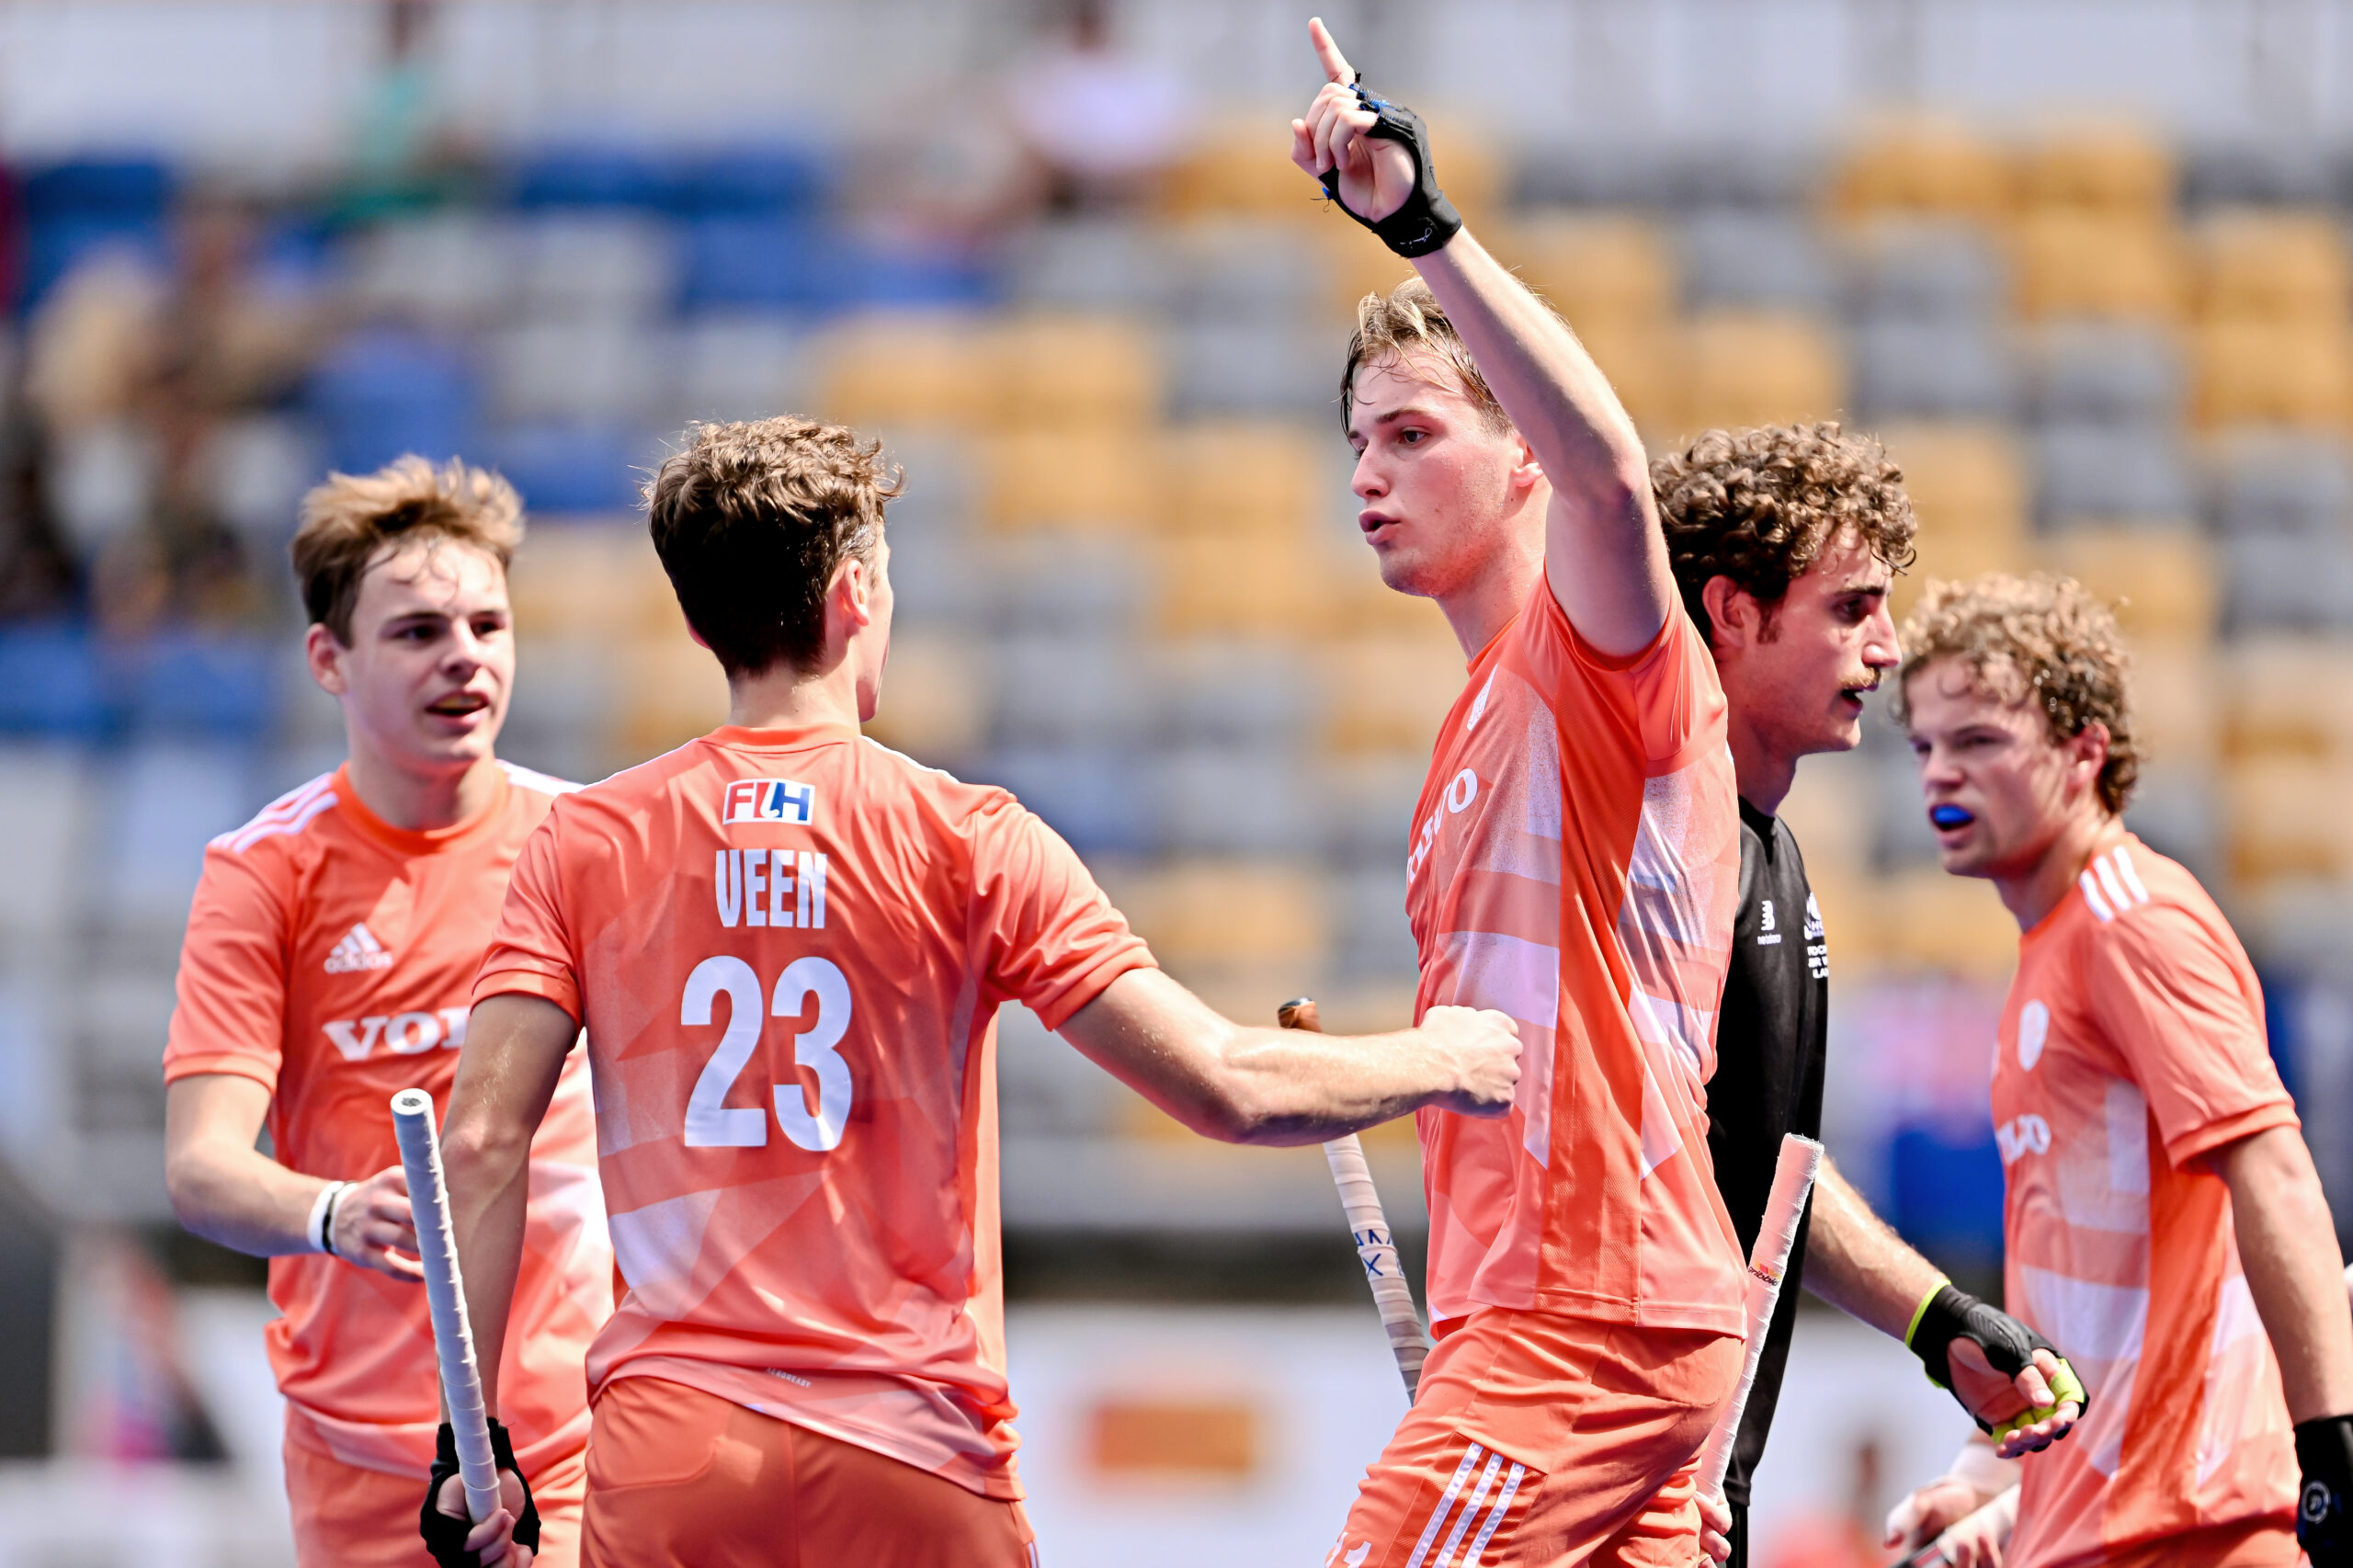 Dutch precision, Spanish artistry: Euro duo stamp authority at Junior World Cup